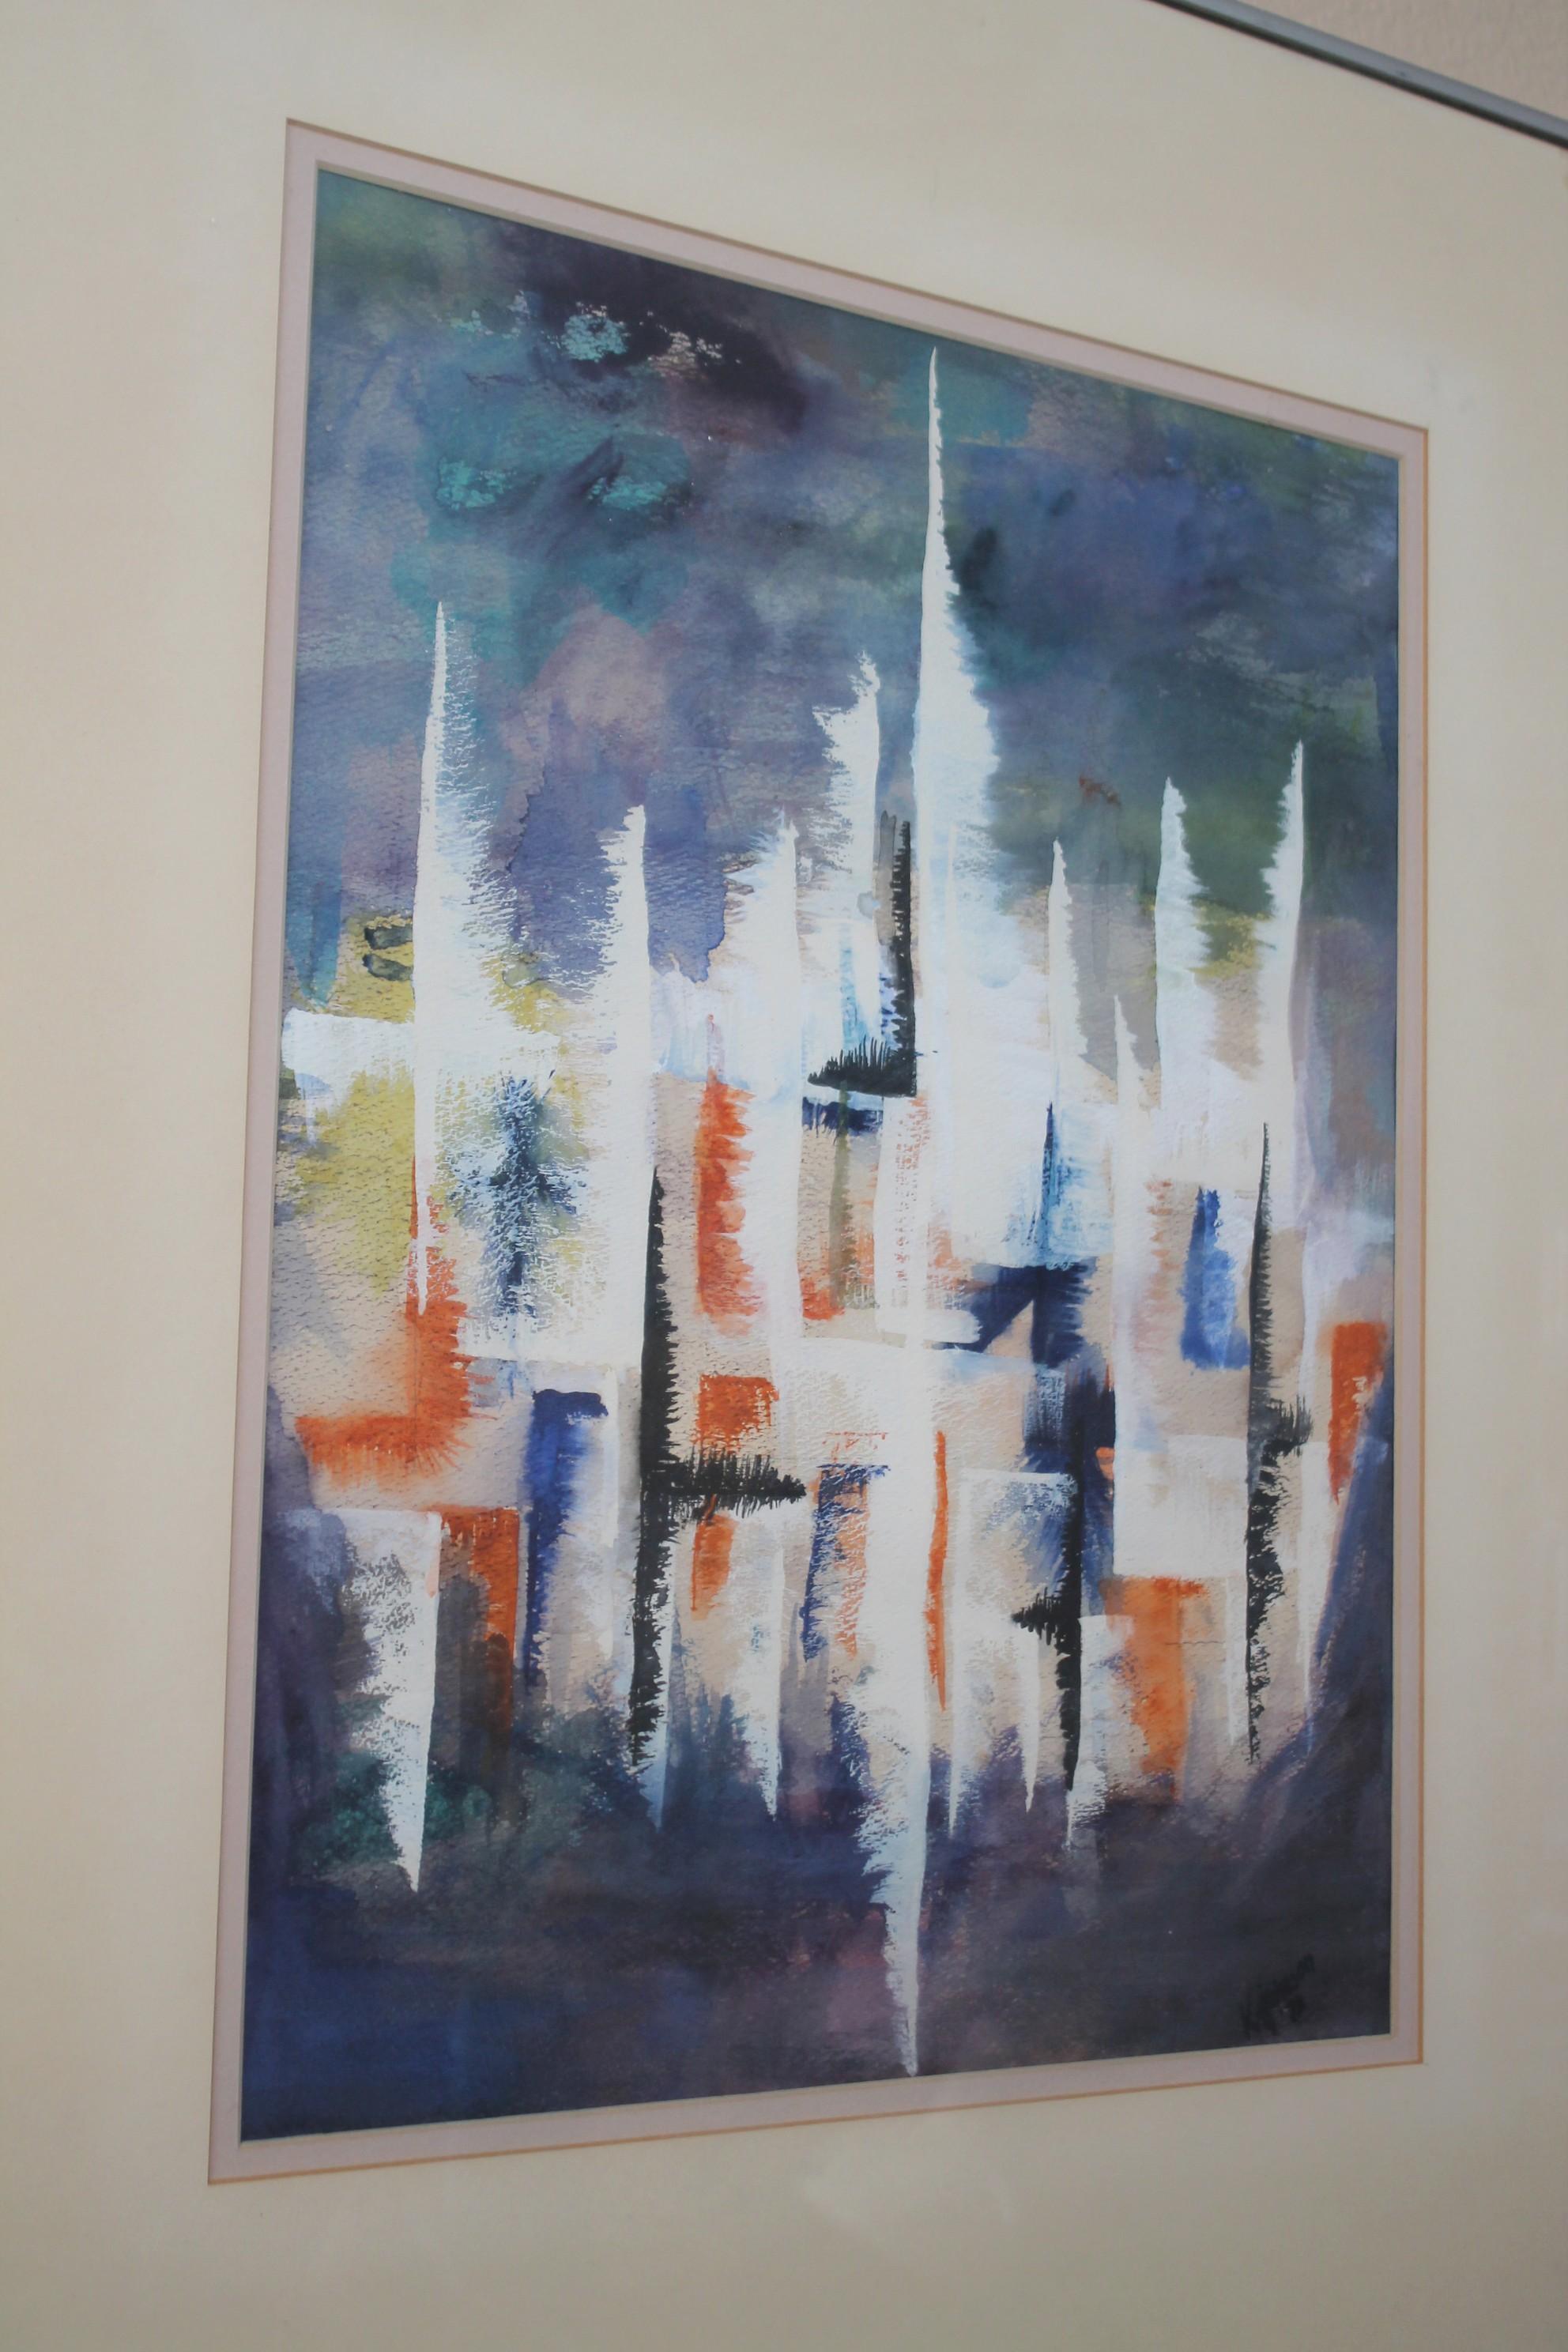 Gorgeous!

Mid Century Modern
Watercolor Painting
By Kay Johnson

1970

This spectacular mid century abstraction has all the right looks and colors to makes an iconic mid century artistic statement! Orange, white, blues and grays work to create a